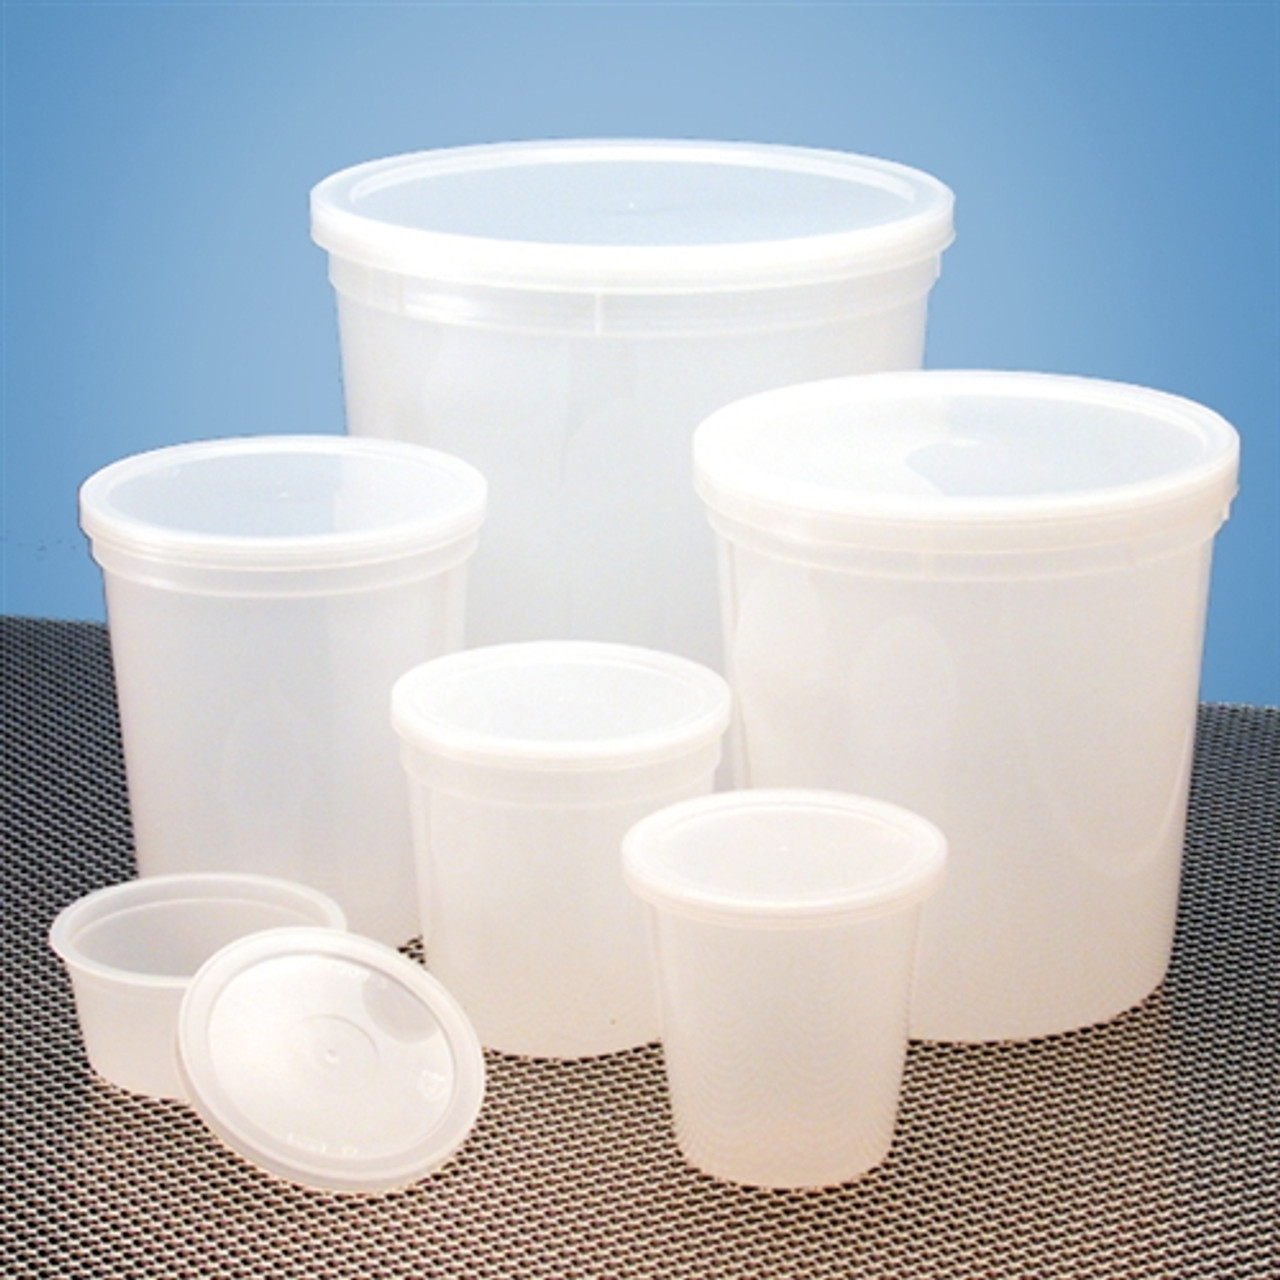 Sample Container (Press & Fit Type), P215.0025 - Manufacturer Suppliers, Sample  Containers